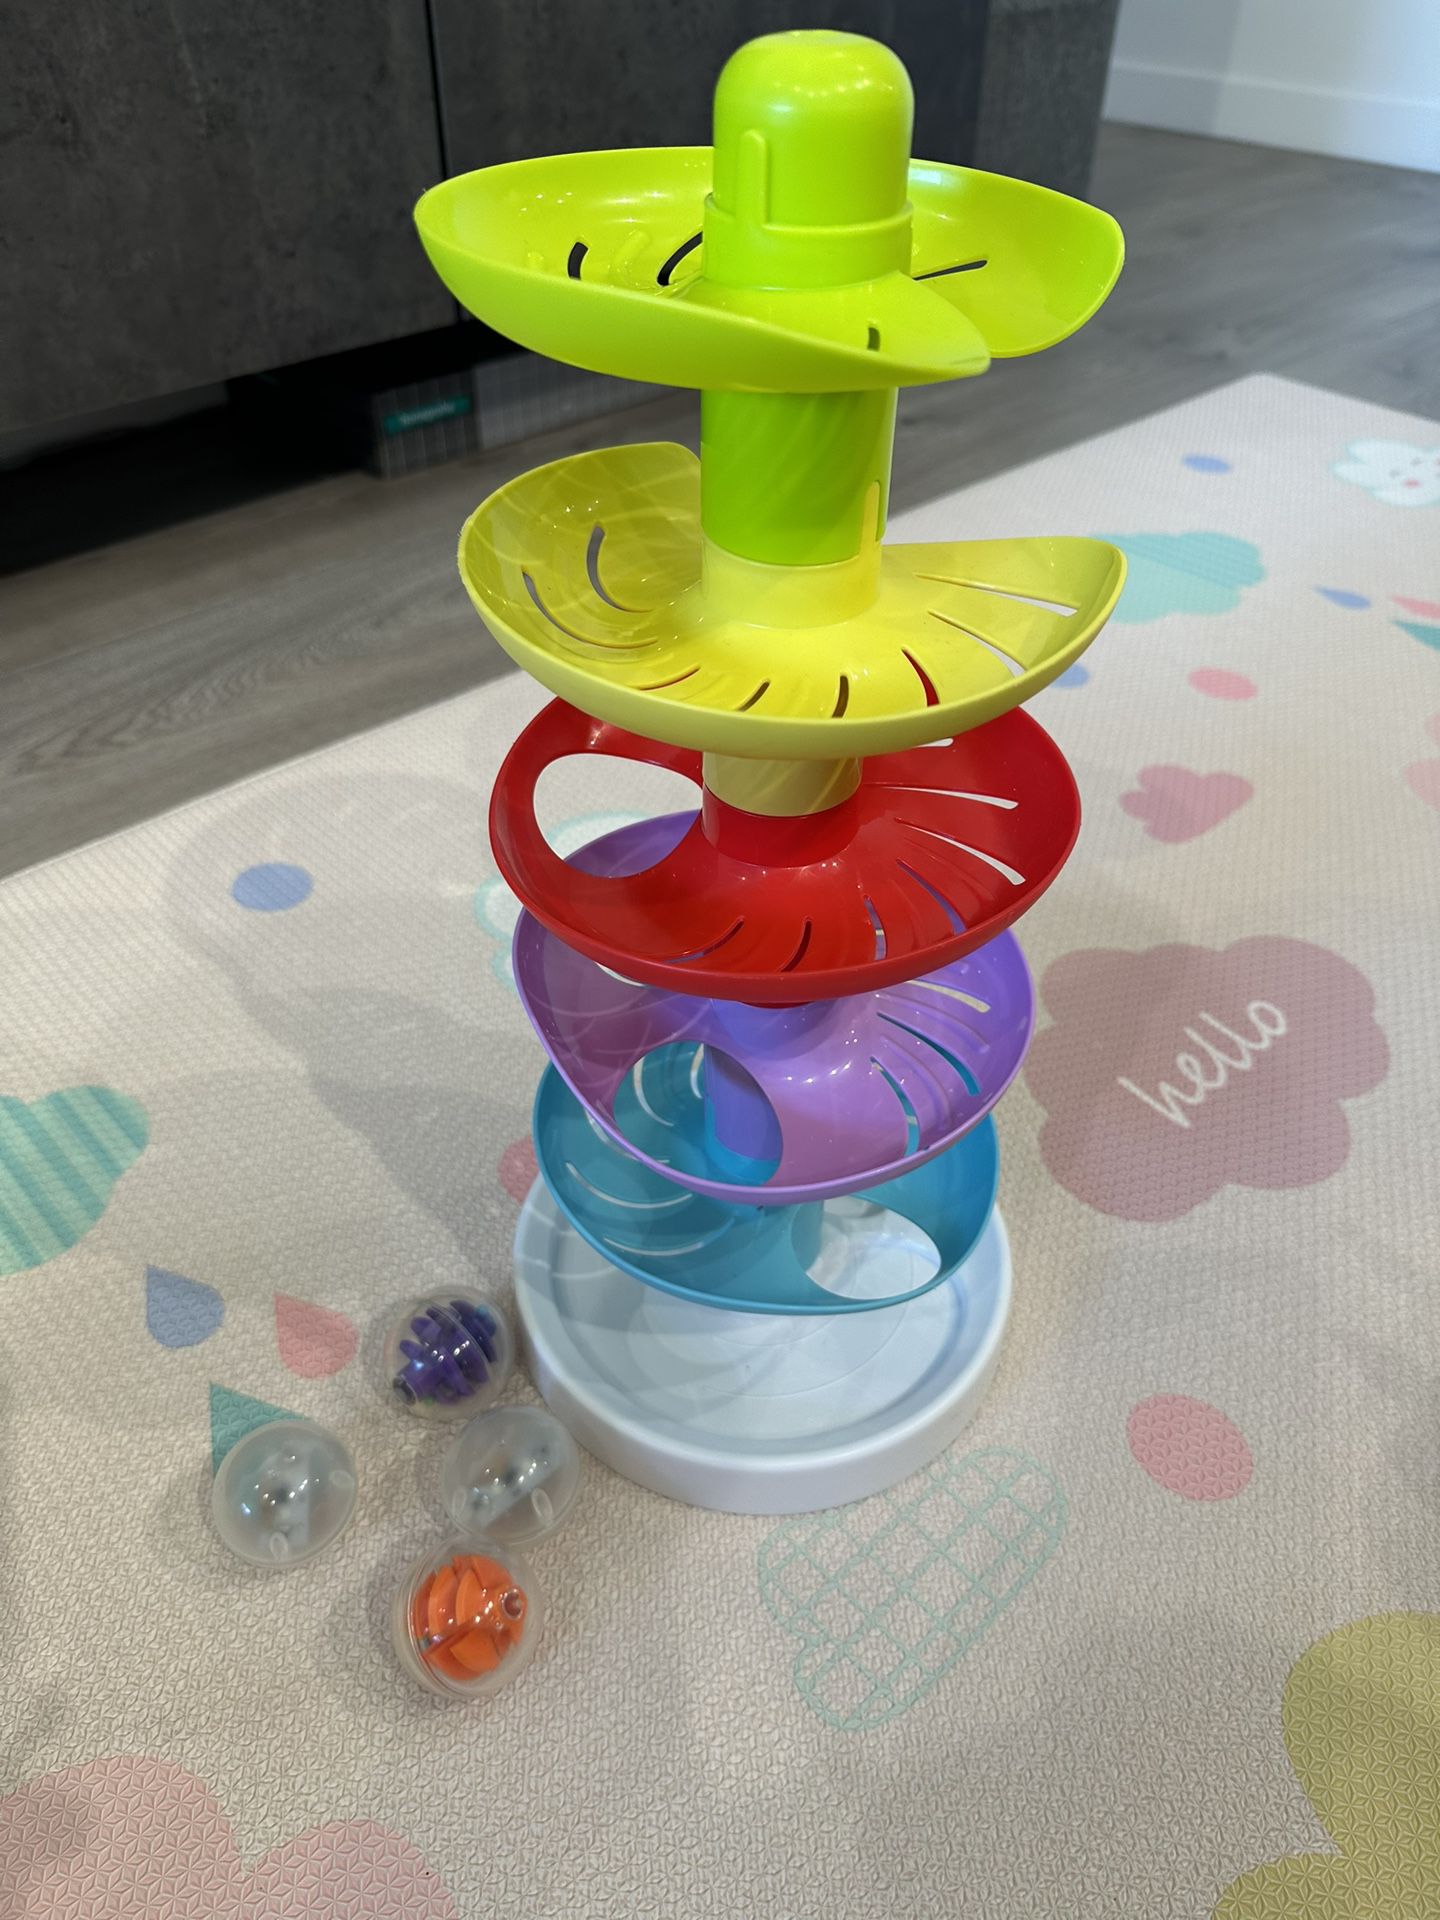 Ball Tower Toy For Toddlers